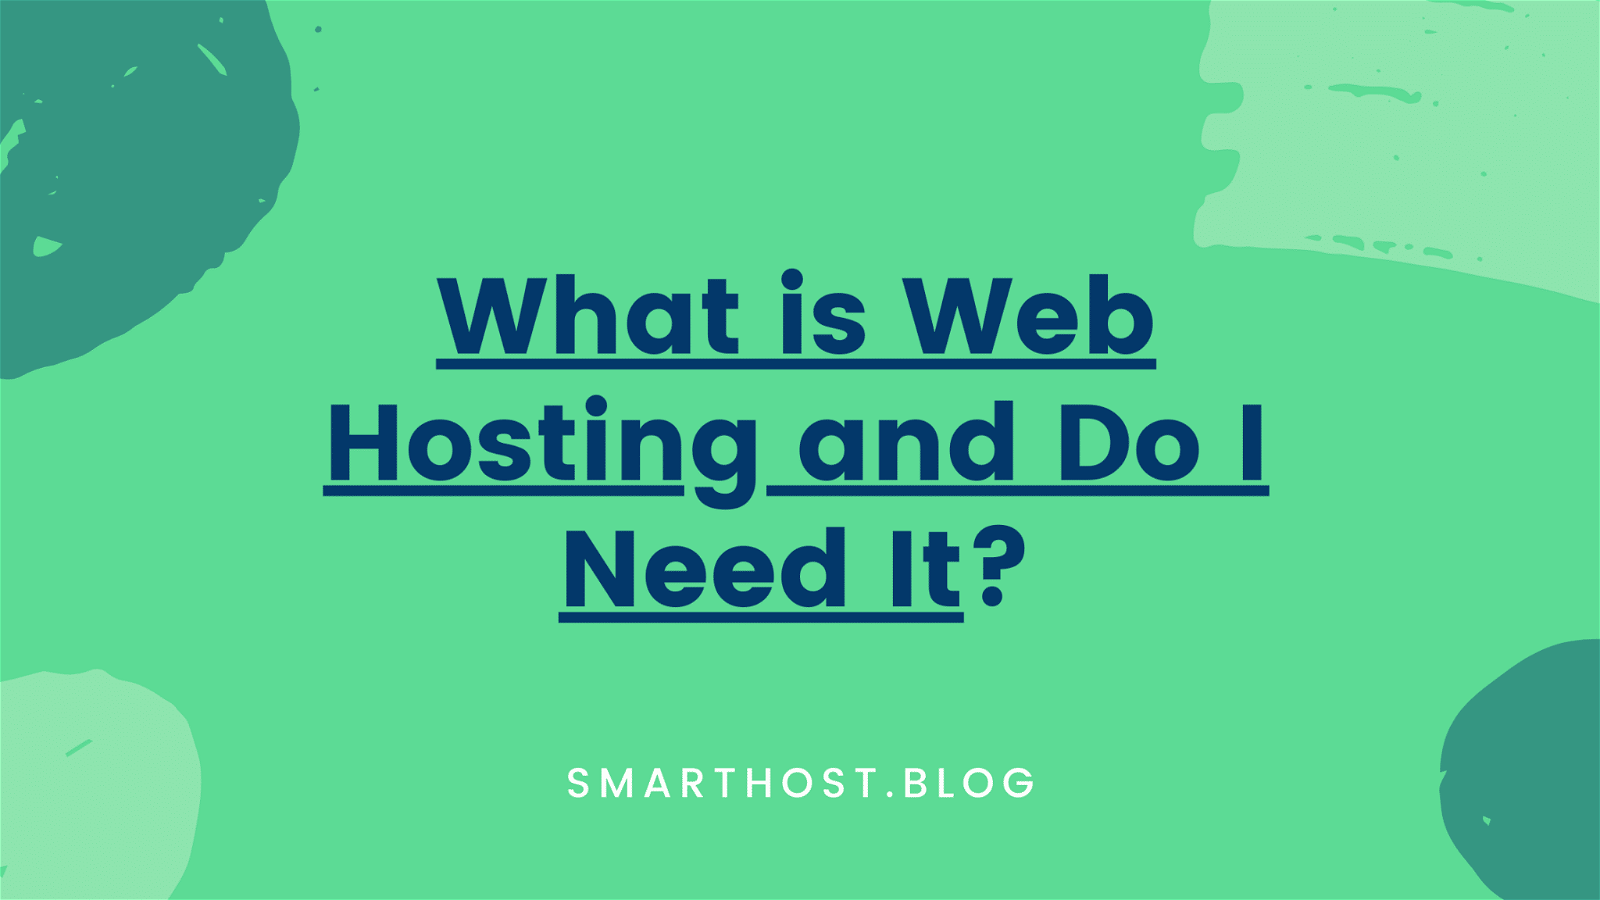 This image is providing information about web hosting and whether it is necessary for a website.